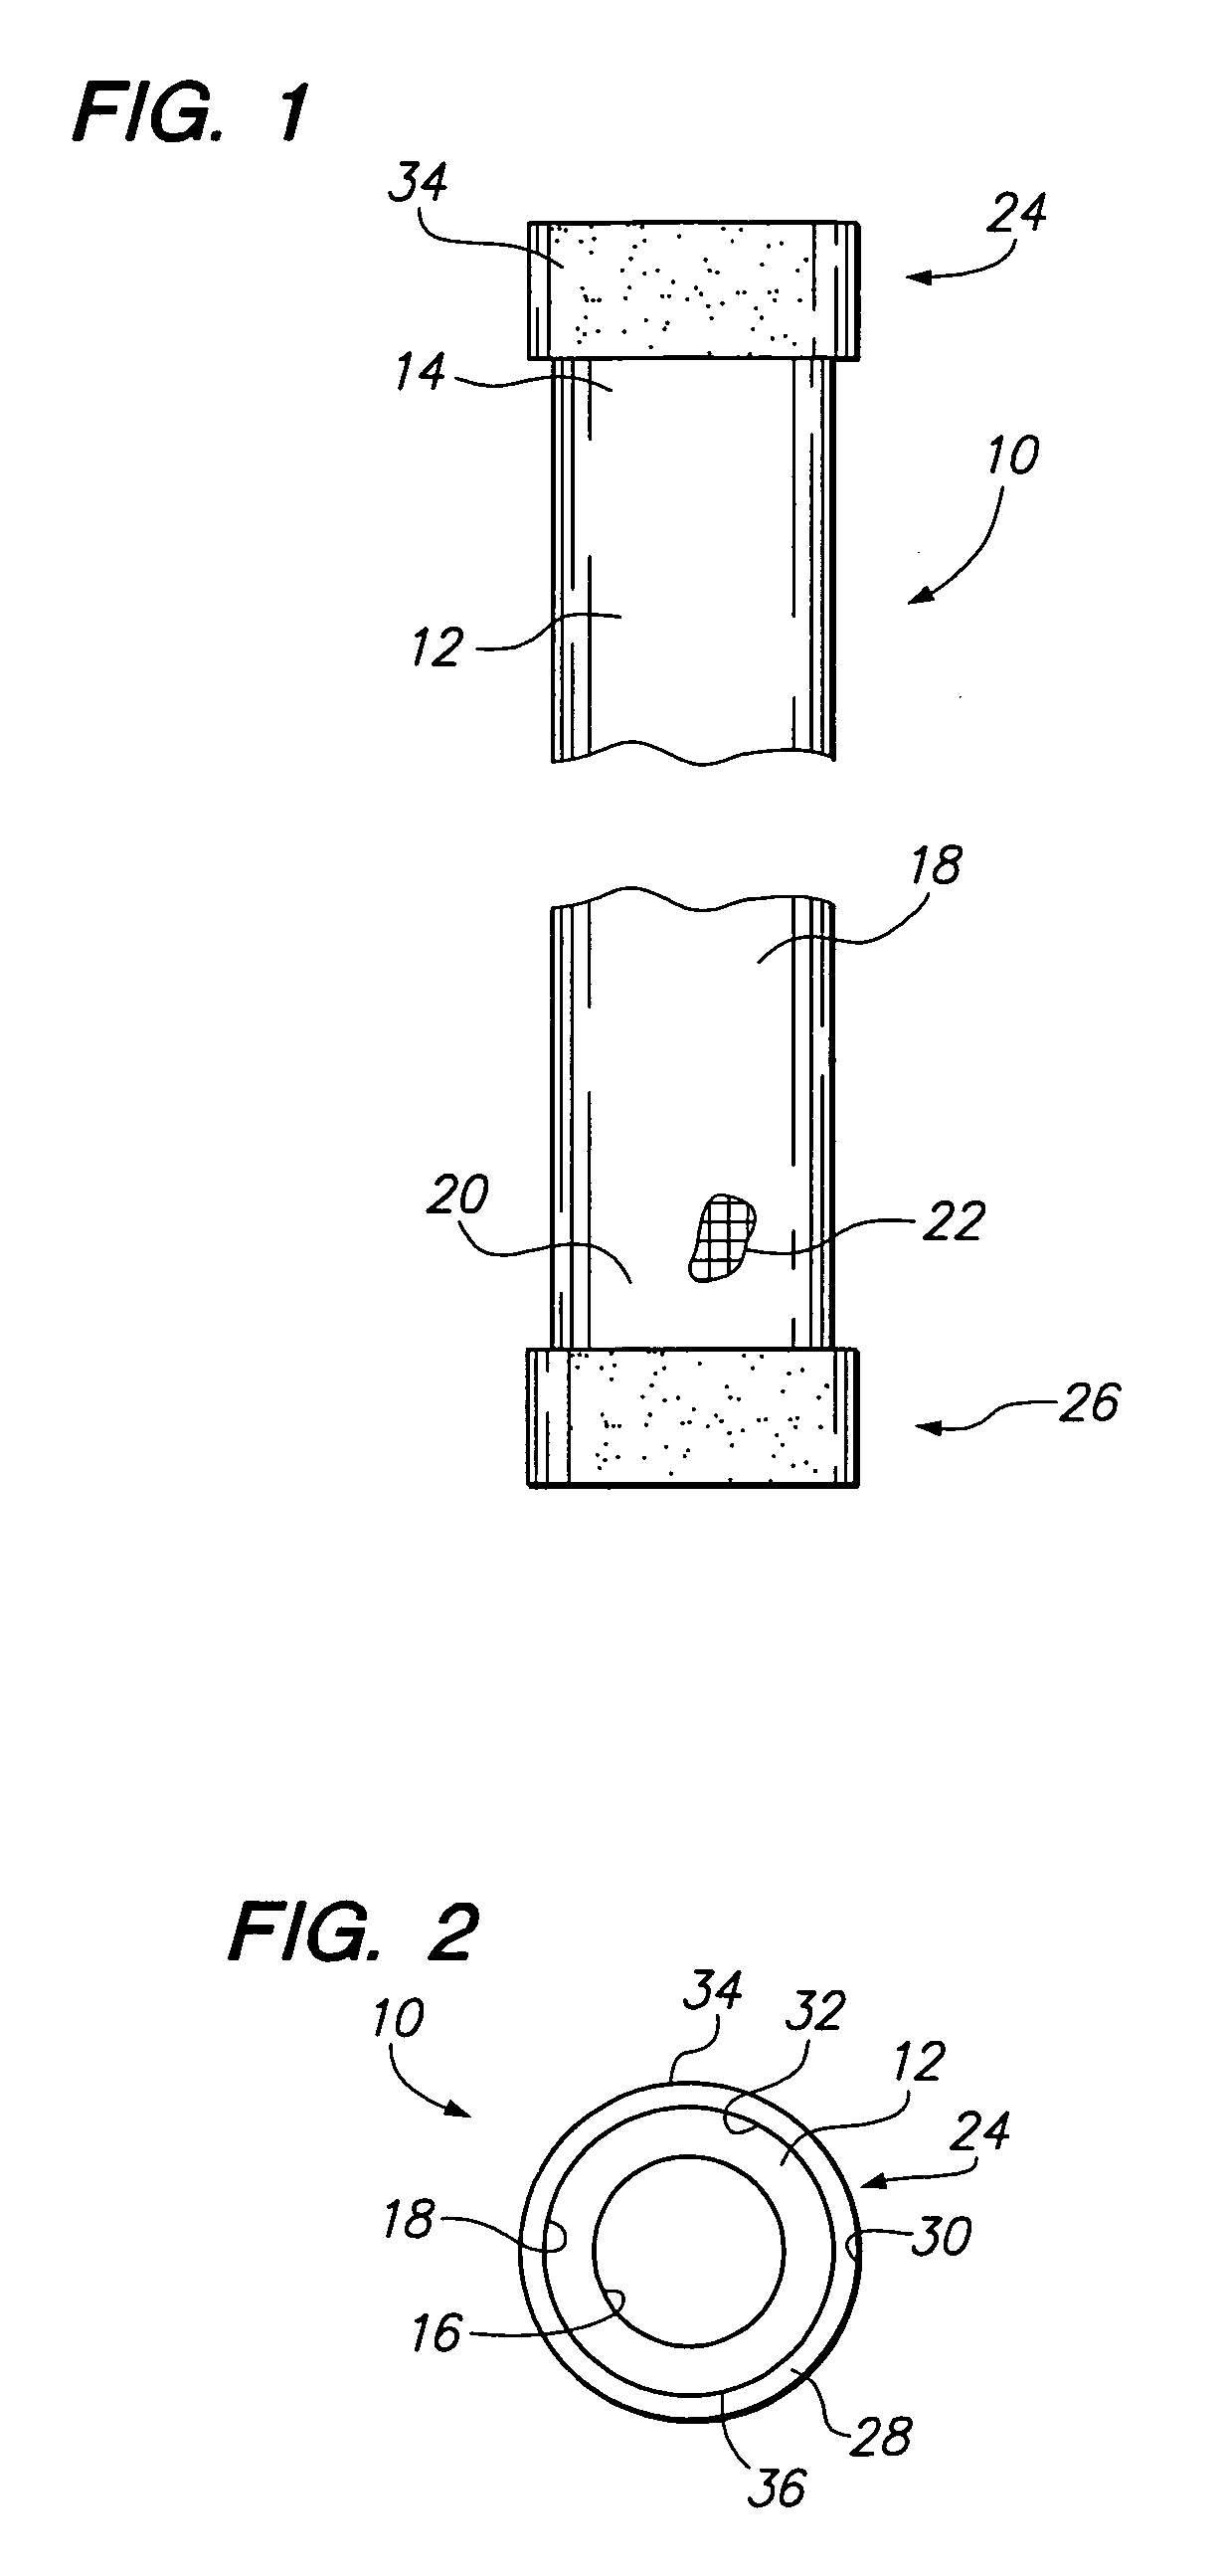 Device for removing a broken light bulb from a socket